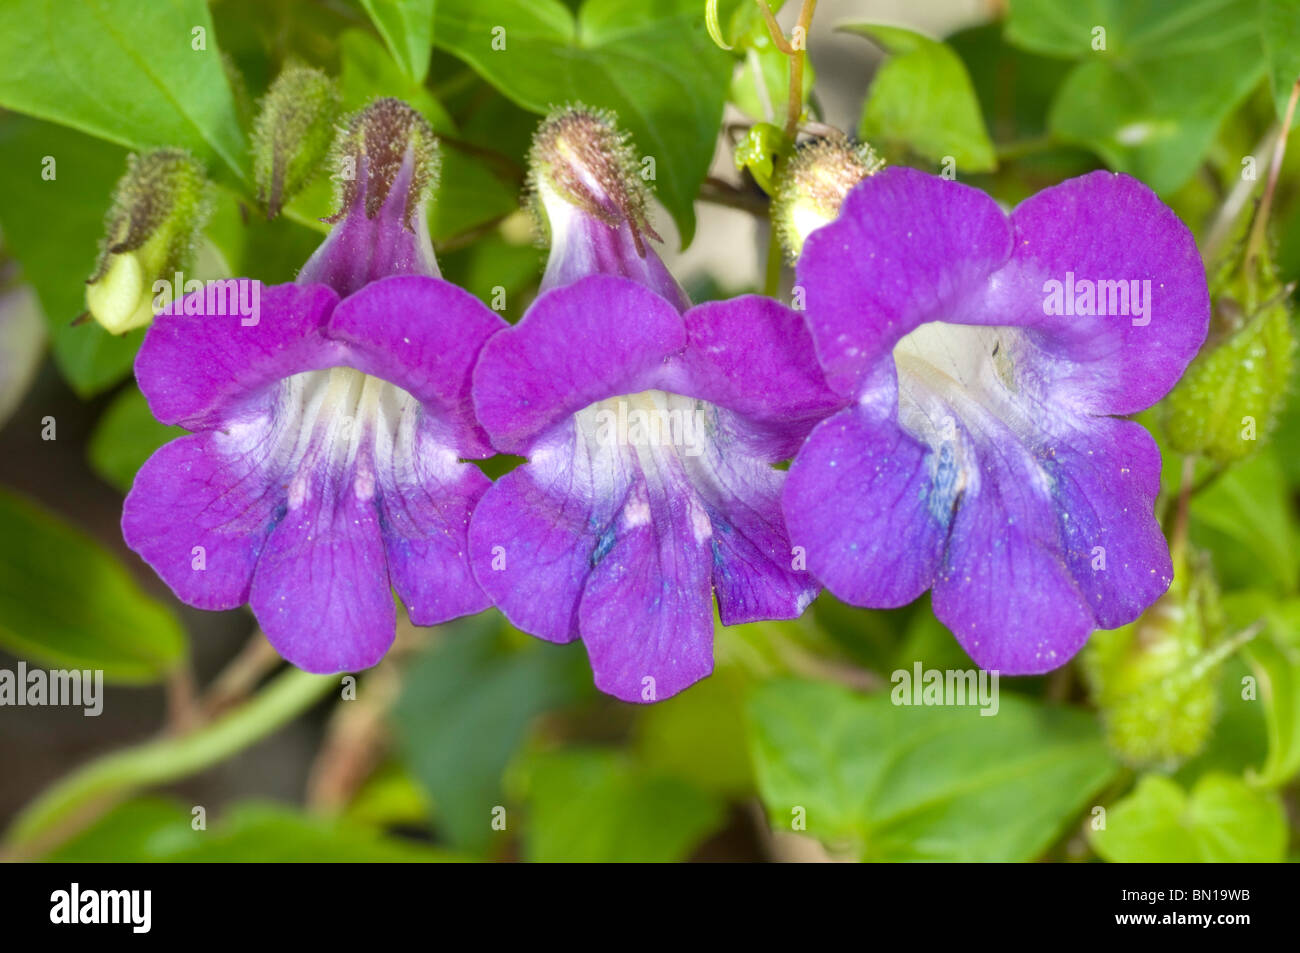 Purple flowers of Asarina scandens, a climbing plant Stock Photo